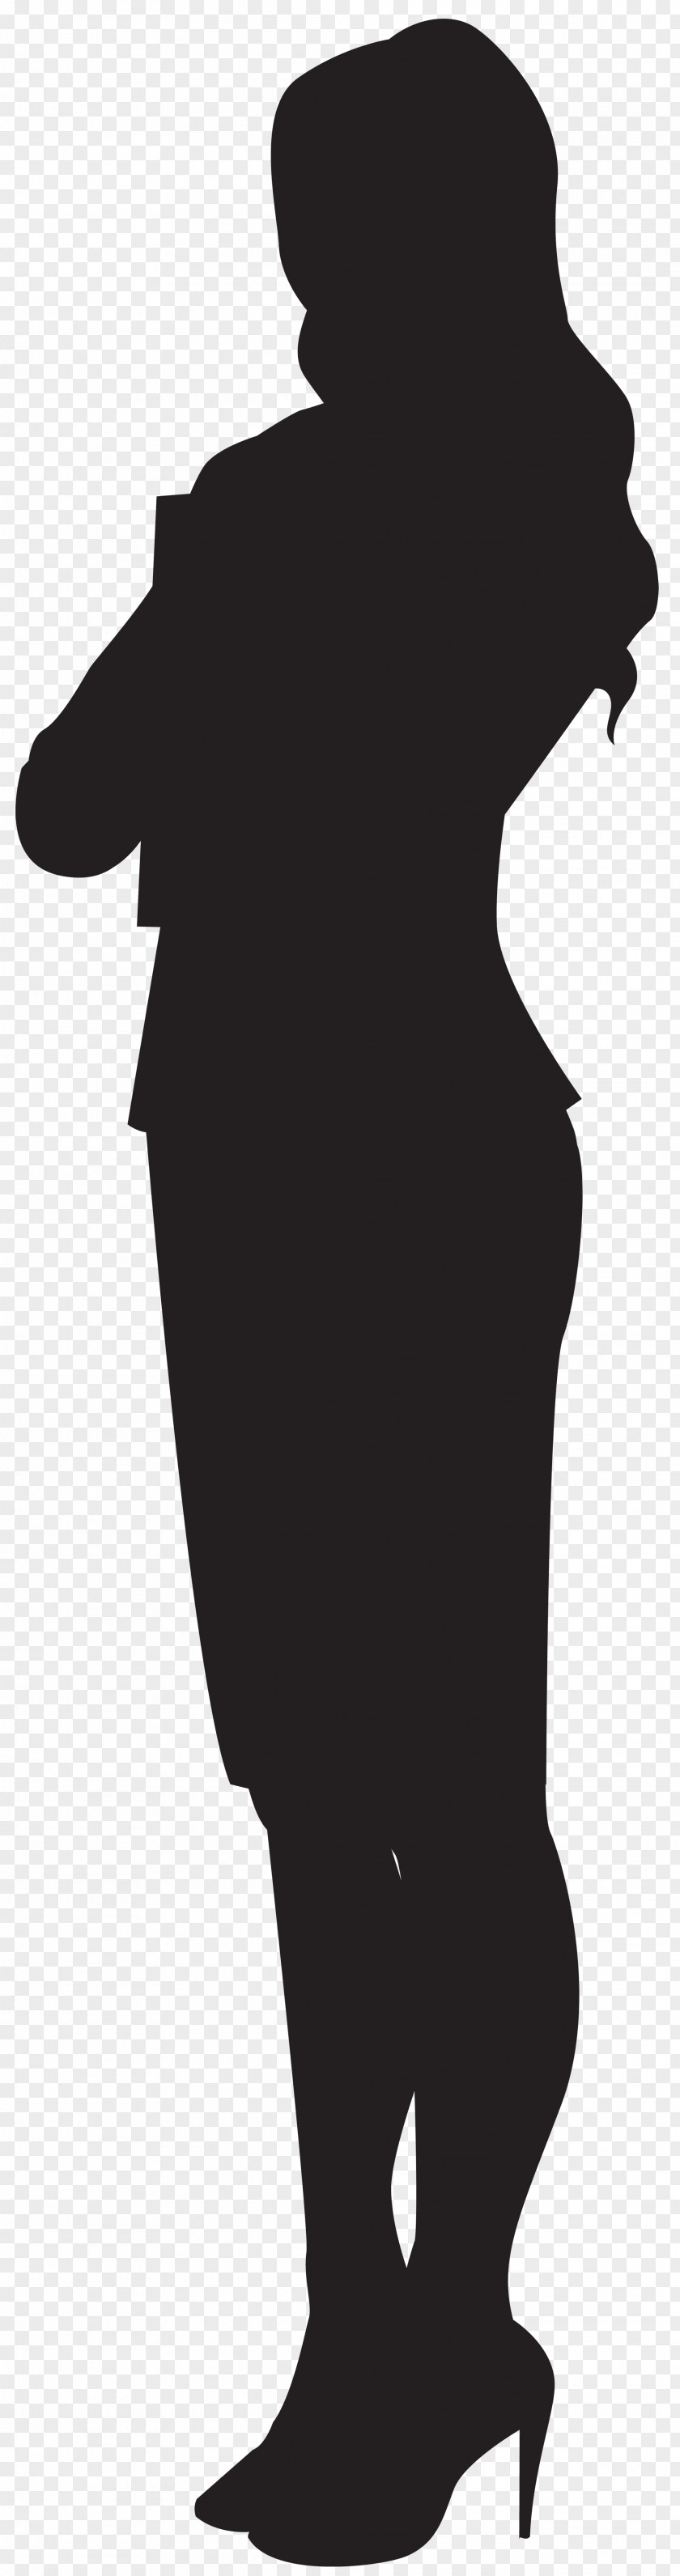 Woman Silhouette Clip Art Image Diana Prince PNG